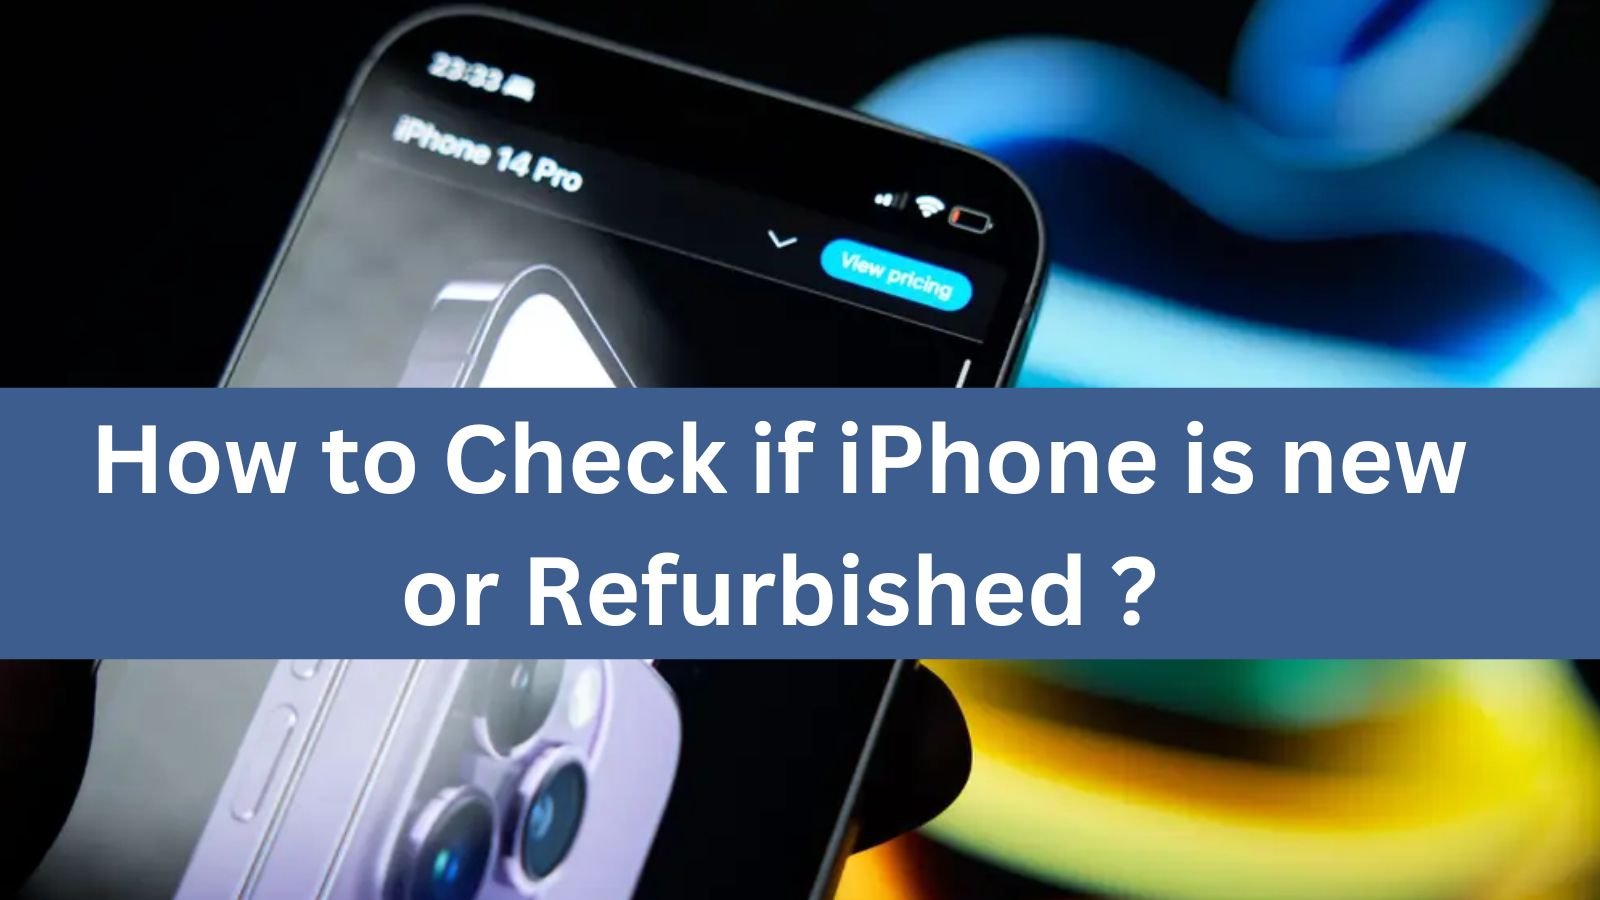 How to Check if iPhone is new or Refurbished